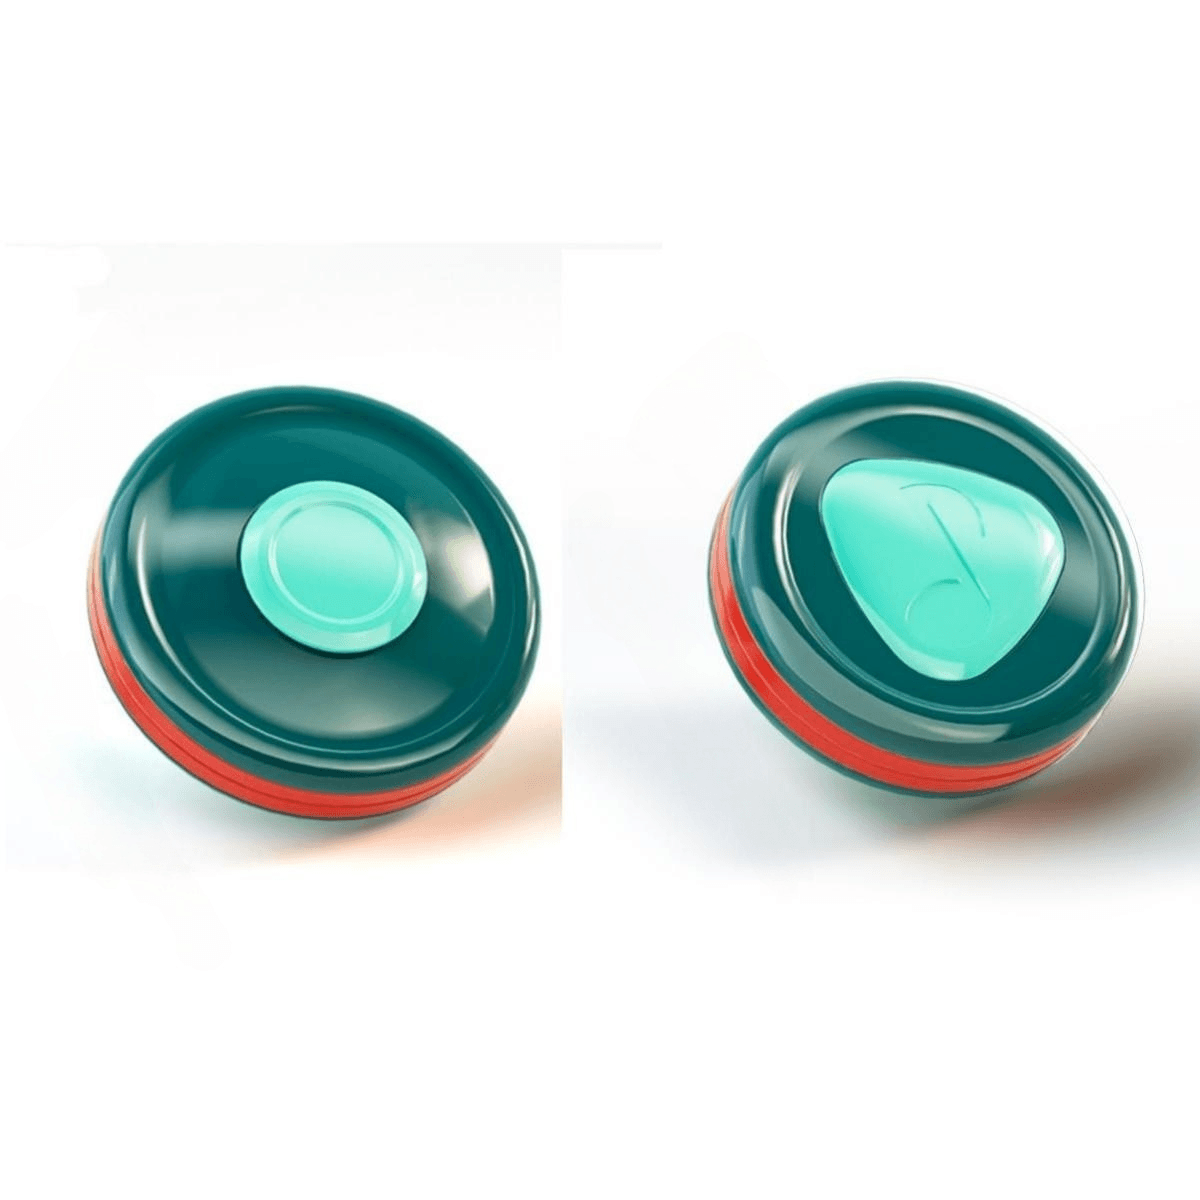 Fidget Toy Sensory Toy Coin - Double the Relaxation, Portable Stress Relief for All Ages! - PANSEKtoy